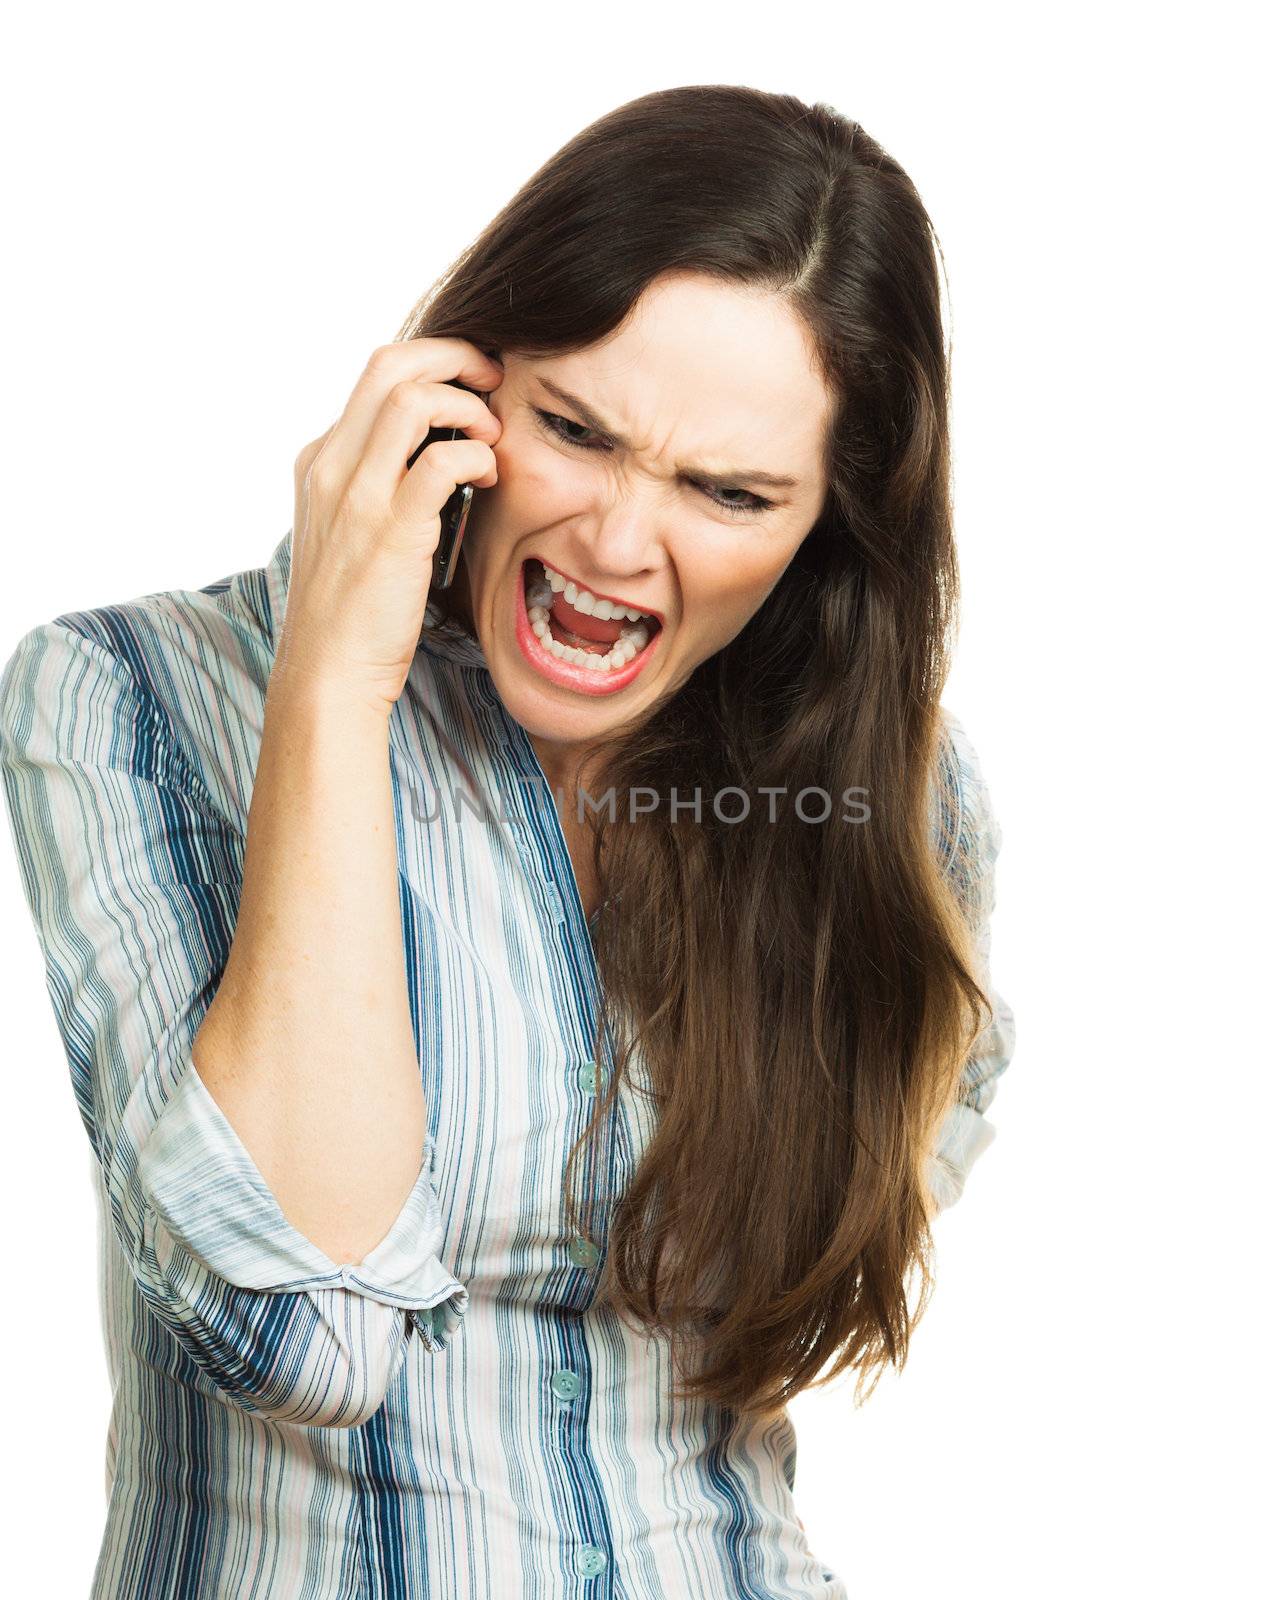 Angry woman screaming on the phone by Jaykayl